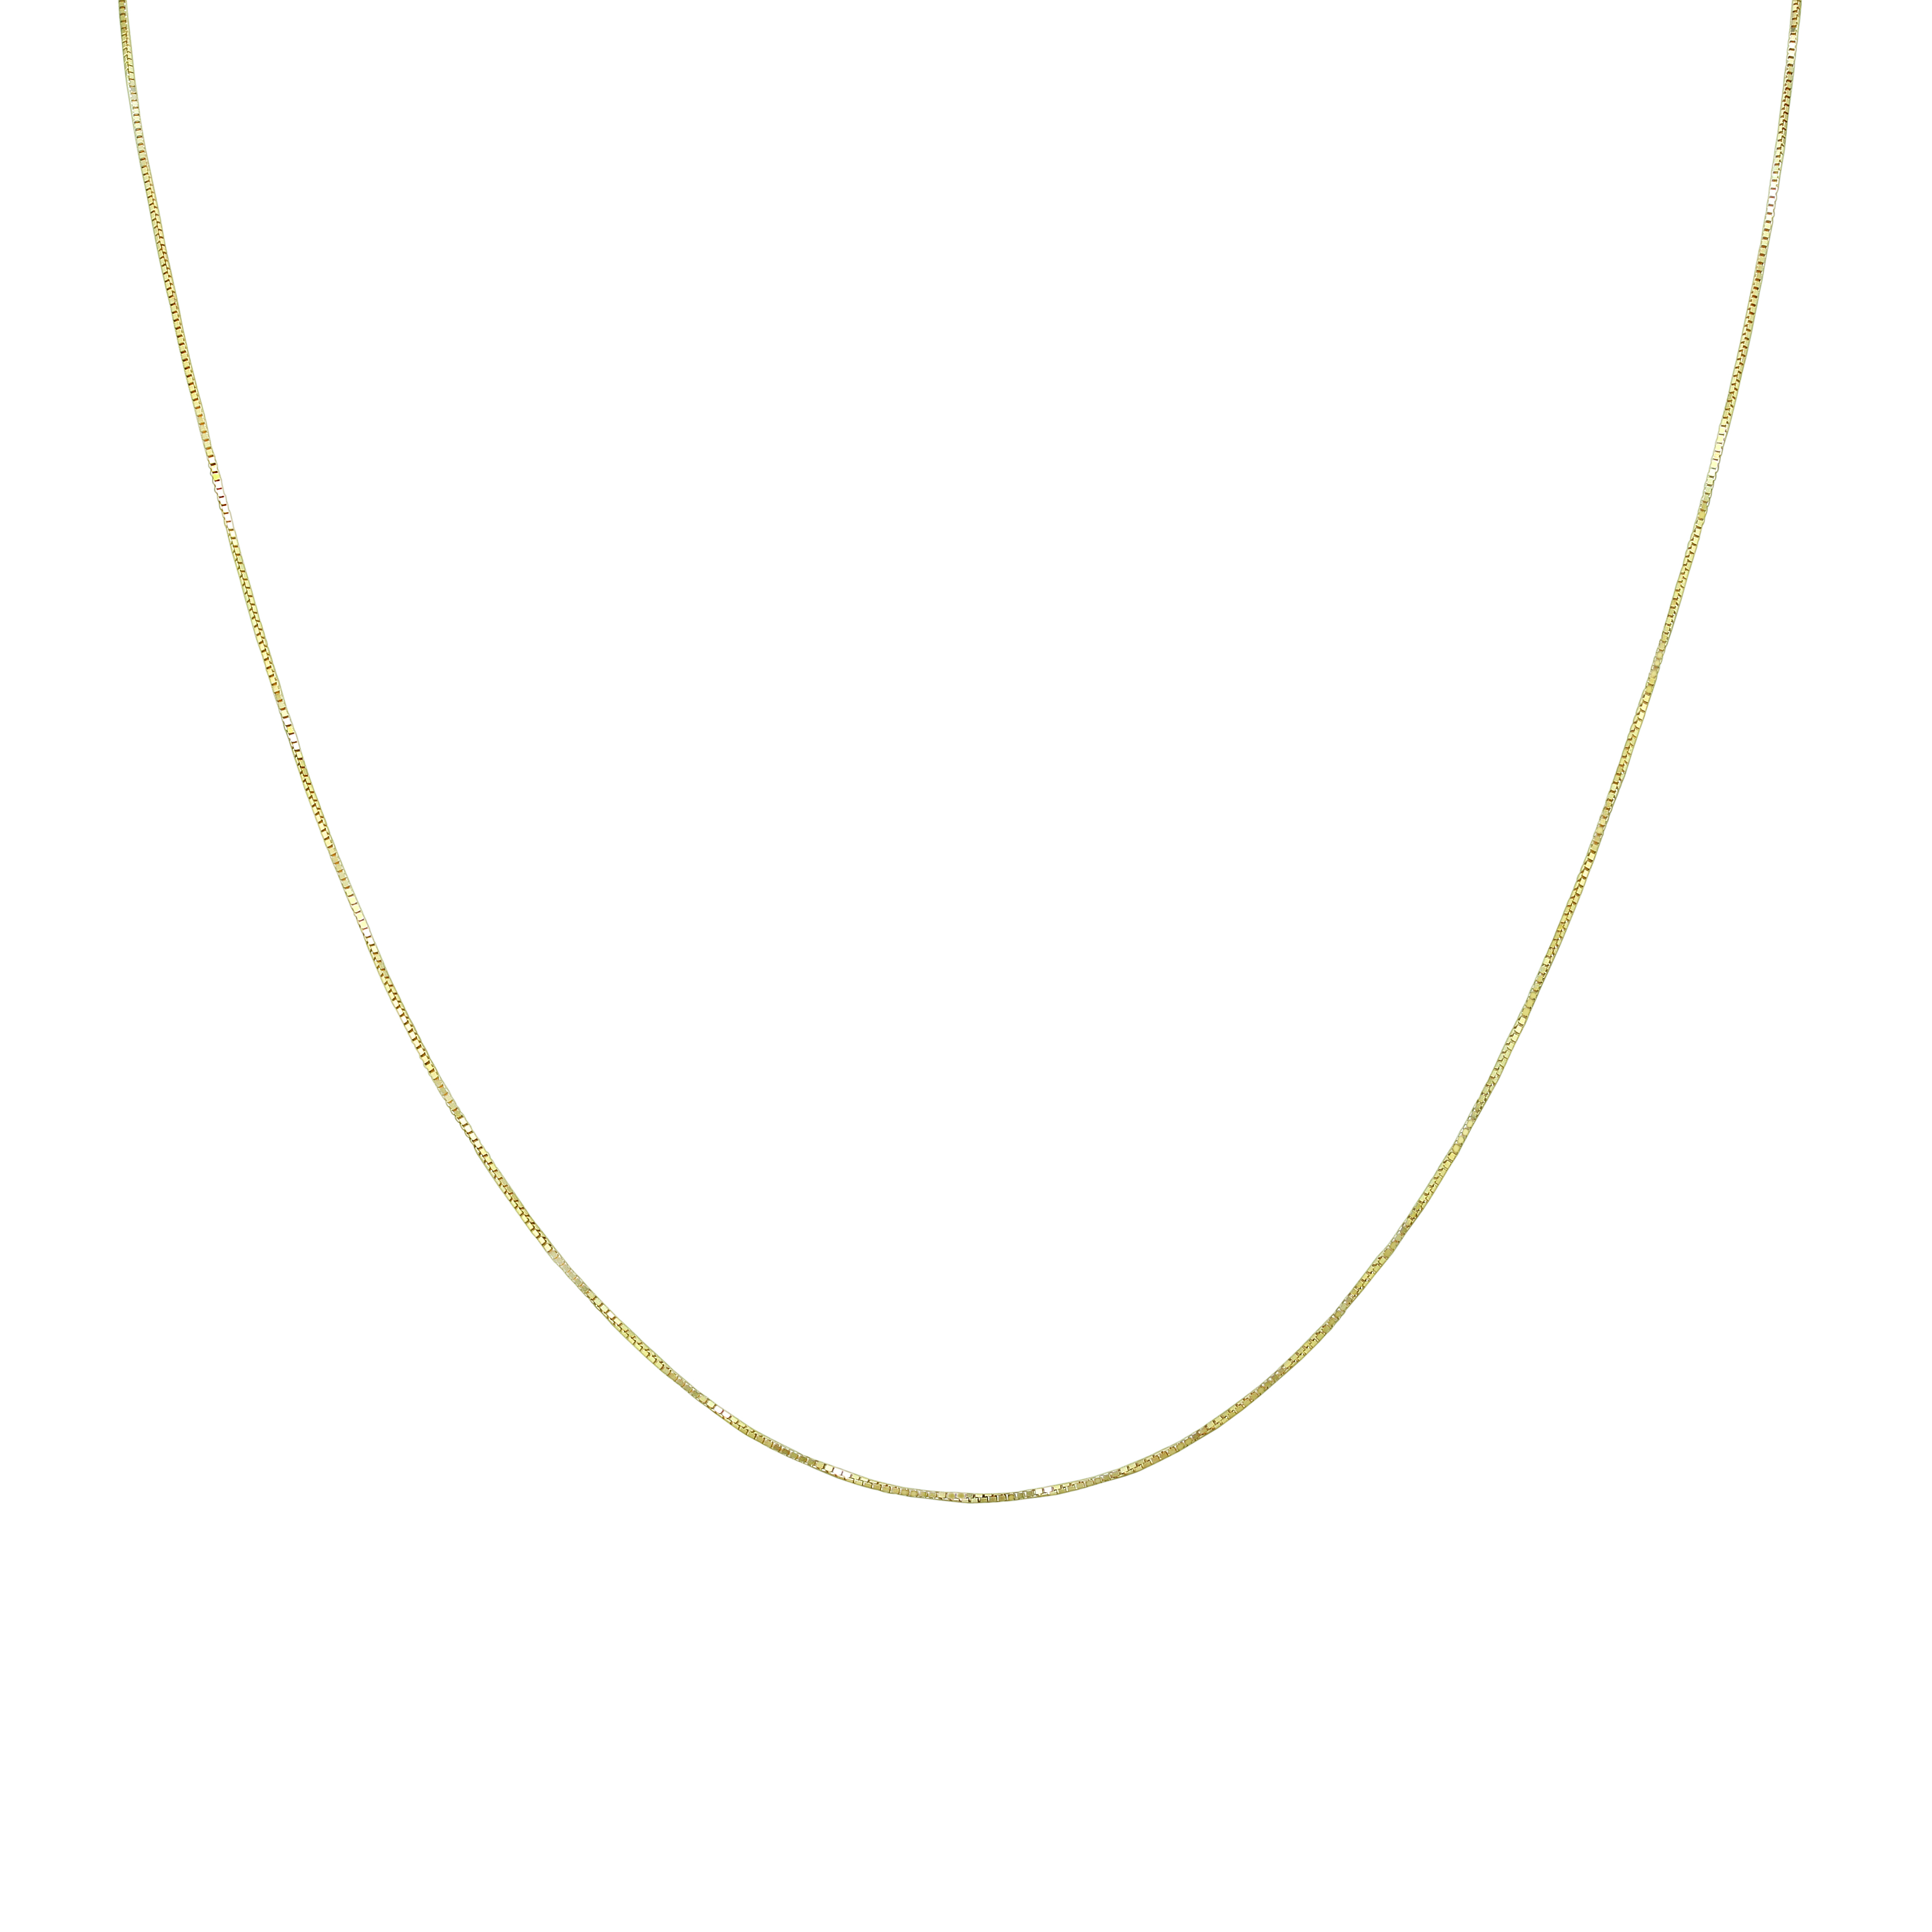 10K Yellow Gold 0.6mm Shiny Classic Box Chain with Spring Ring Clasp - 20 Inch